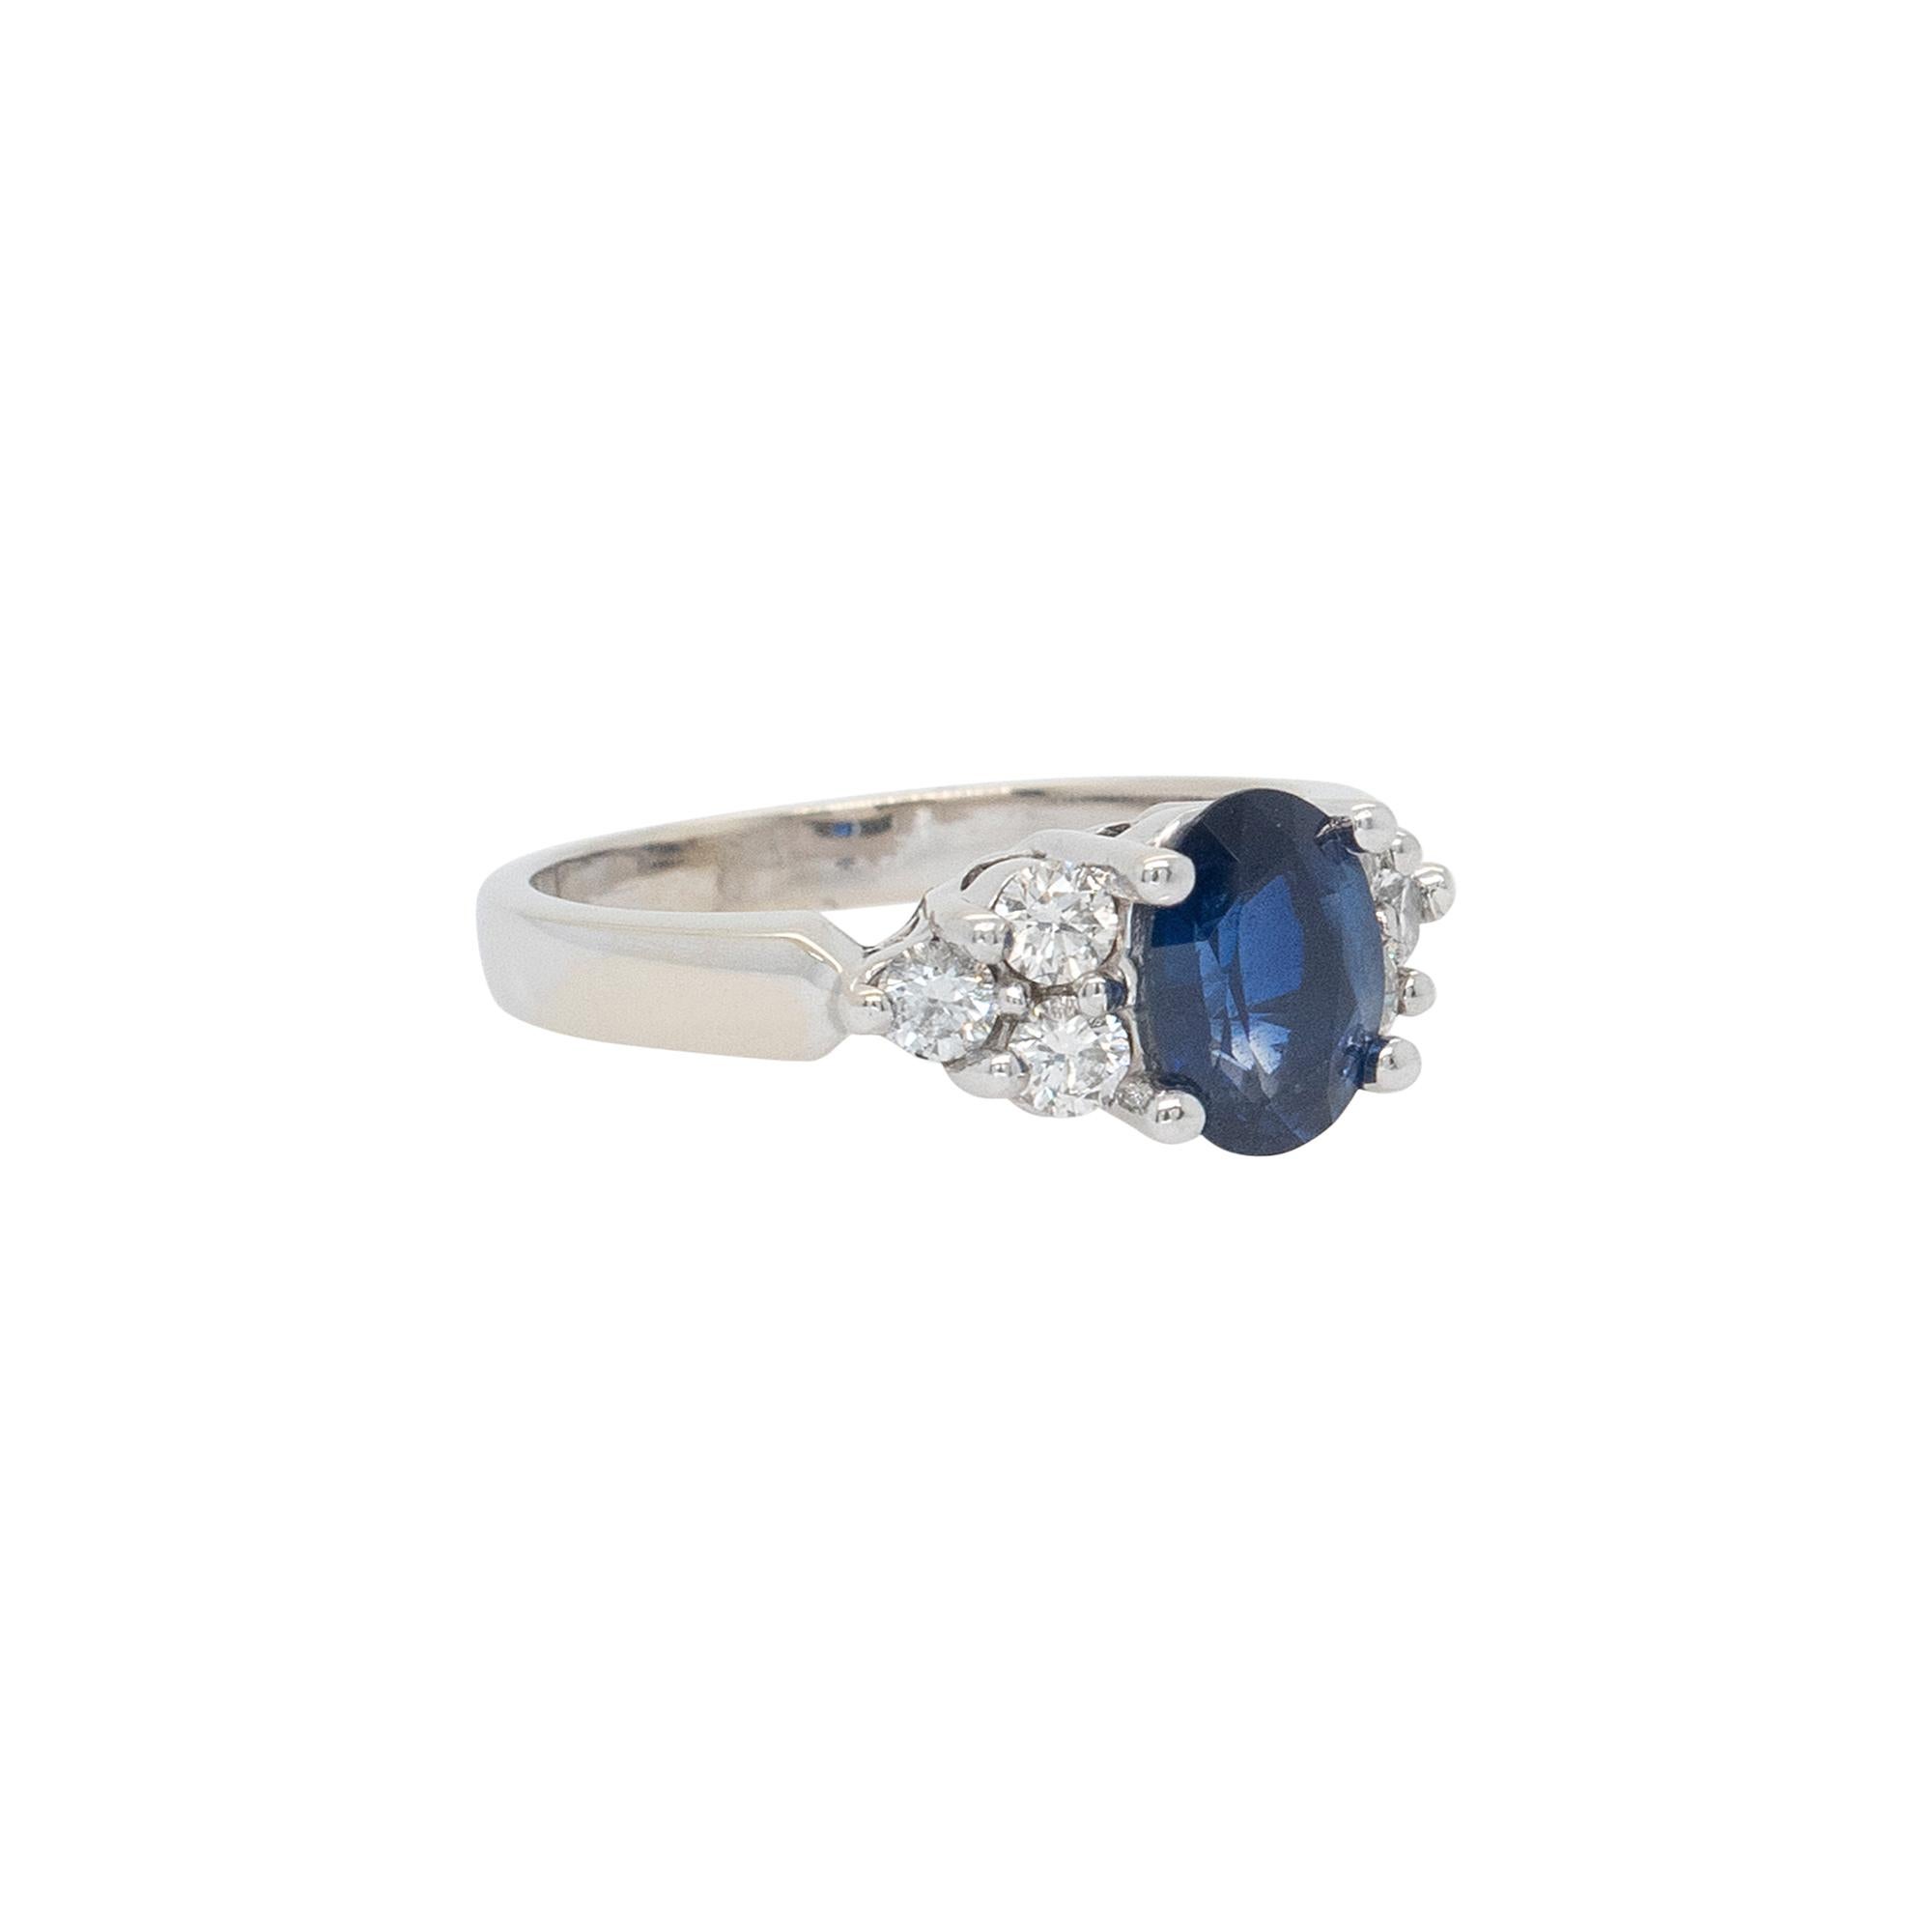 Center Details: 1.00ctw Oval Sapphire
Ring Material: 
14k White Gold 0.24ctw Natural Round Brilliant Cut Diamonds (6 Diamonds)
17mm x 24mm
Ring Size: 5.75 (can be sized)
Total Weight: 2.7g (1.7dwt)
This item comes with a presentation box!
SKU: